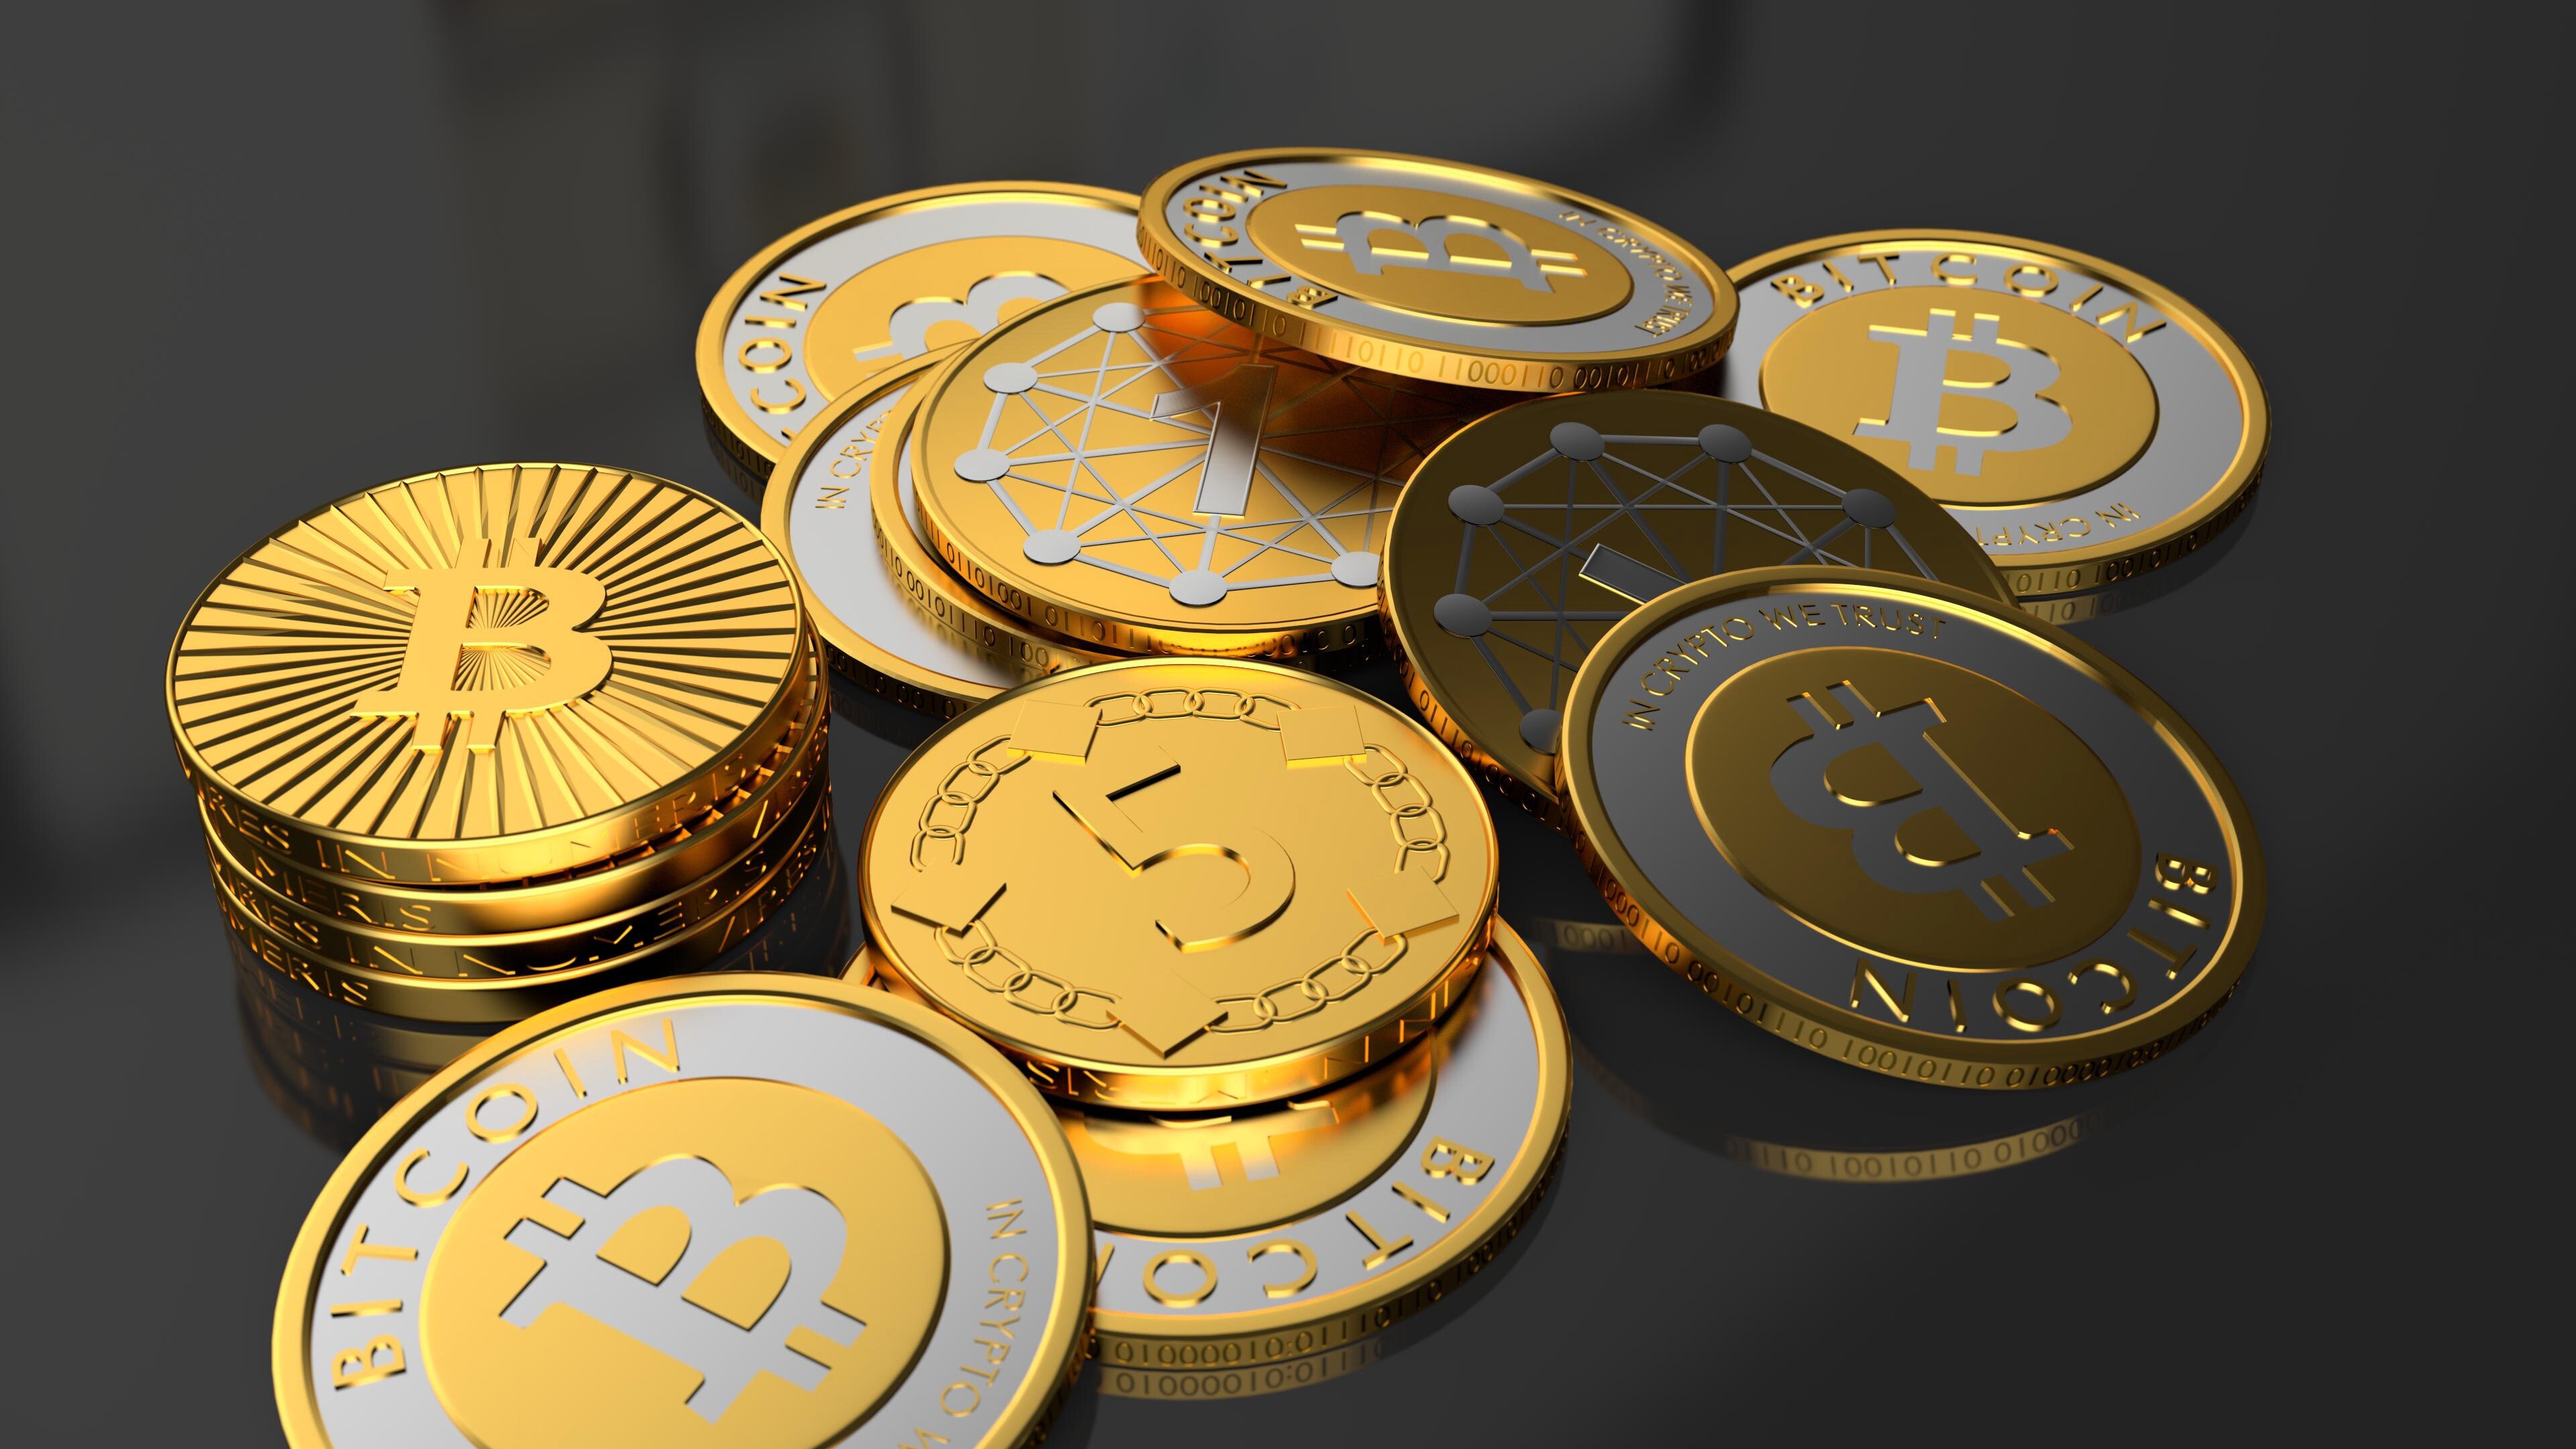 Cryptocurrency: Bitcoins, Virtual currency secured by cryptography, Satoshi. 3840x2160 4K Wallpaper.